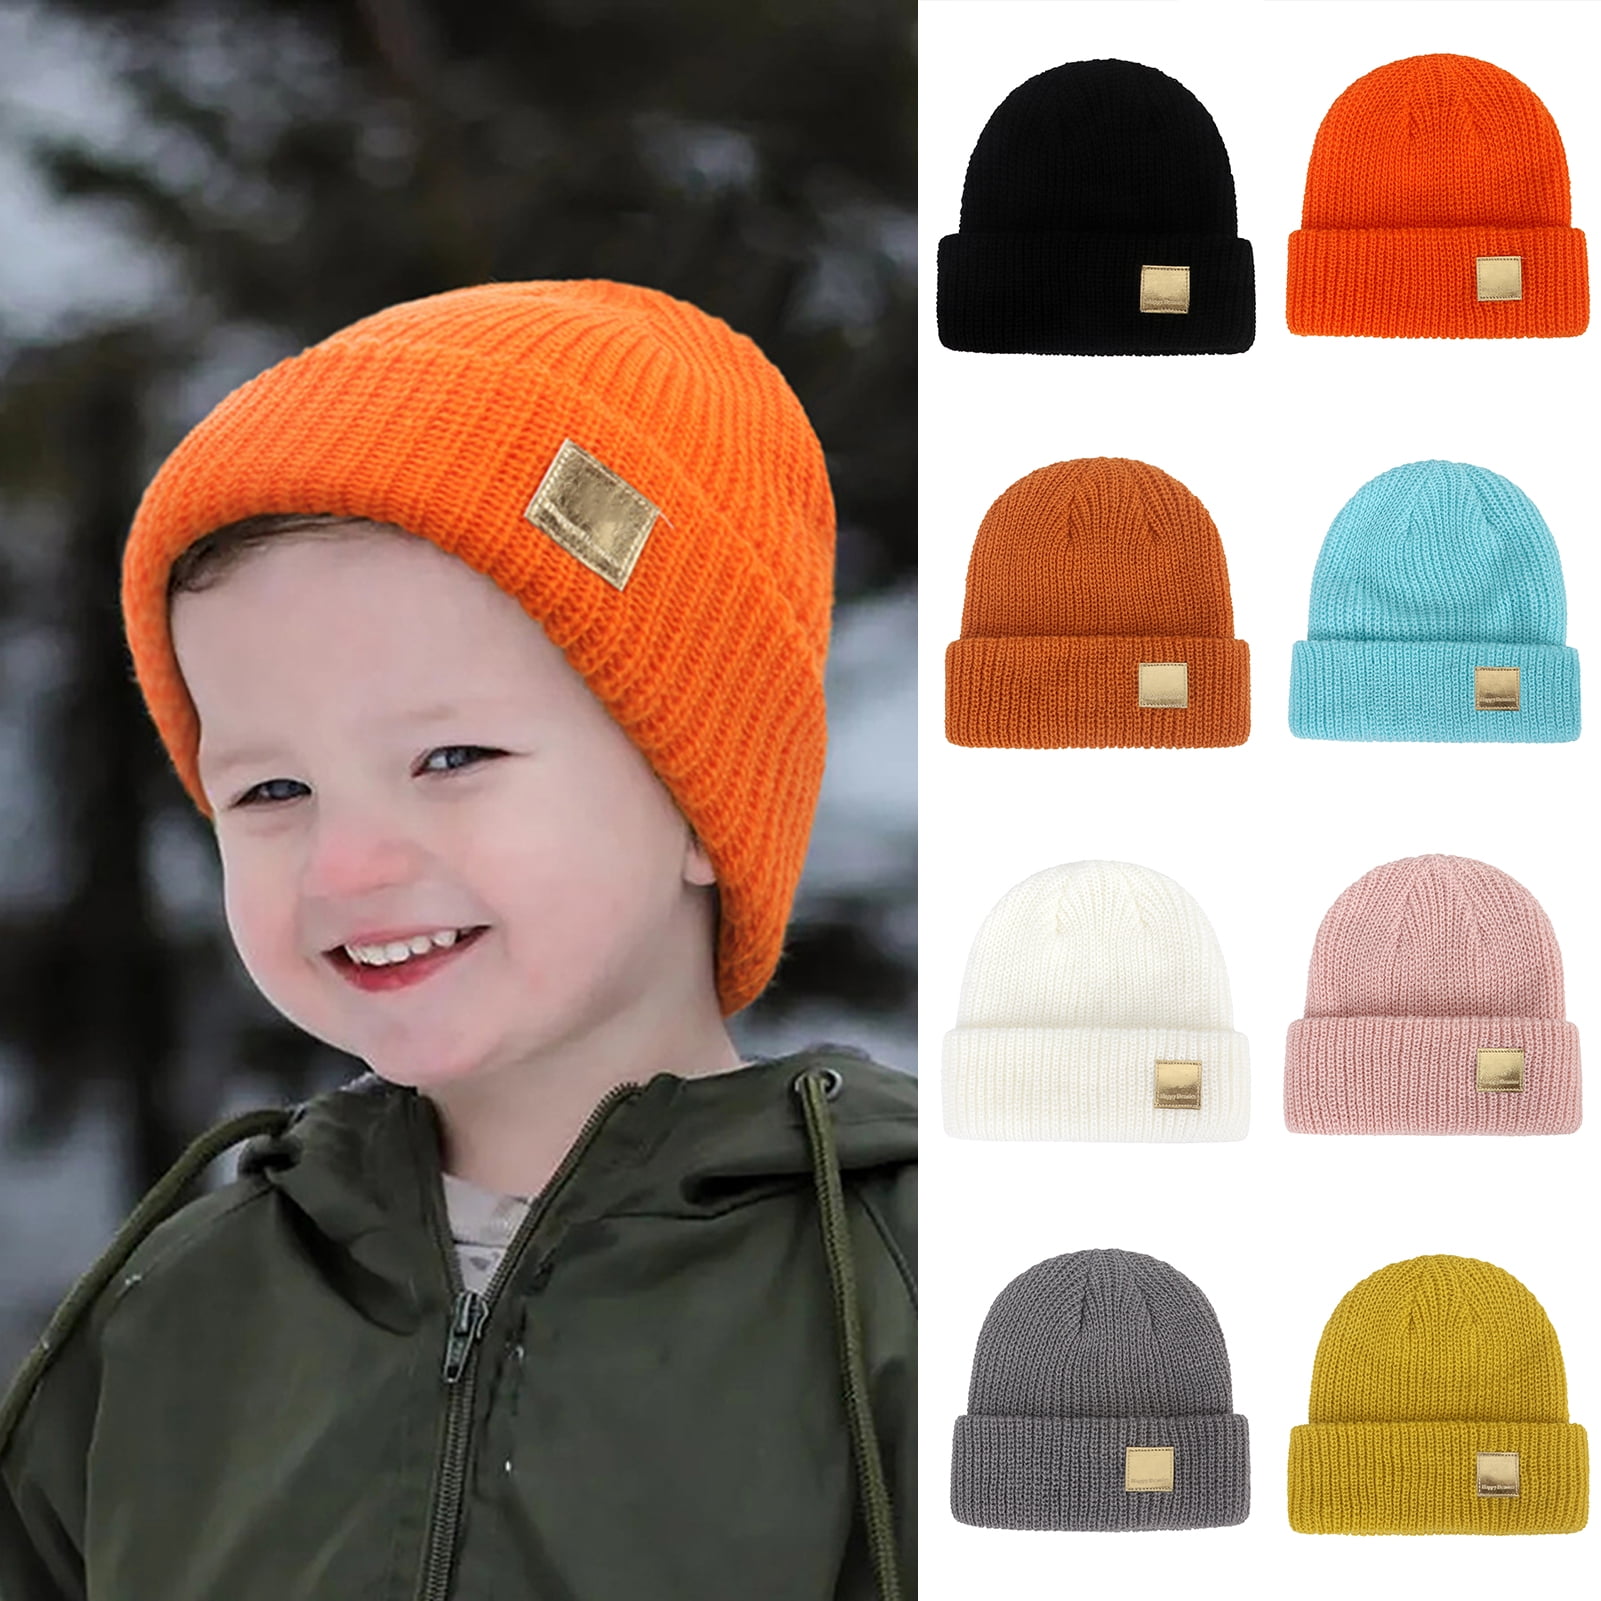 Hesroicy Adjustable Drawstring Hemming Twist Texture Knitting Hat Women  Solid Color Riding Winter Beanie Hat 